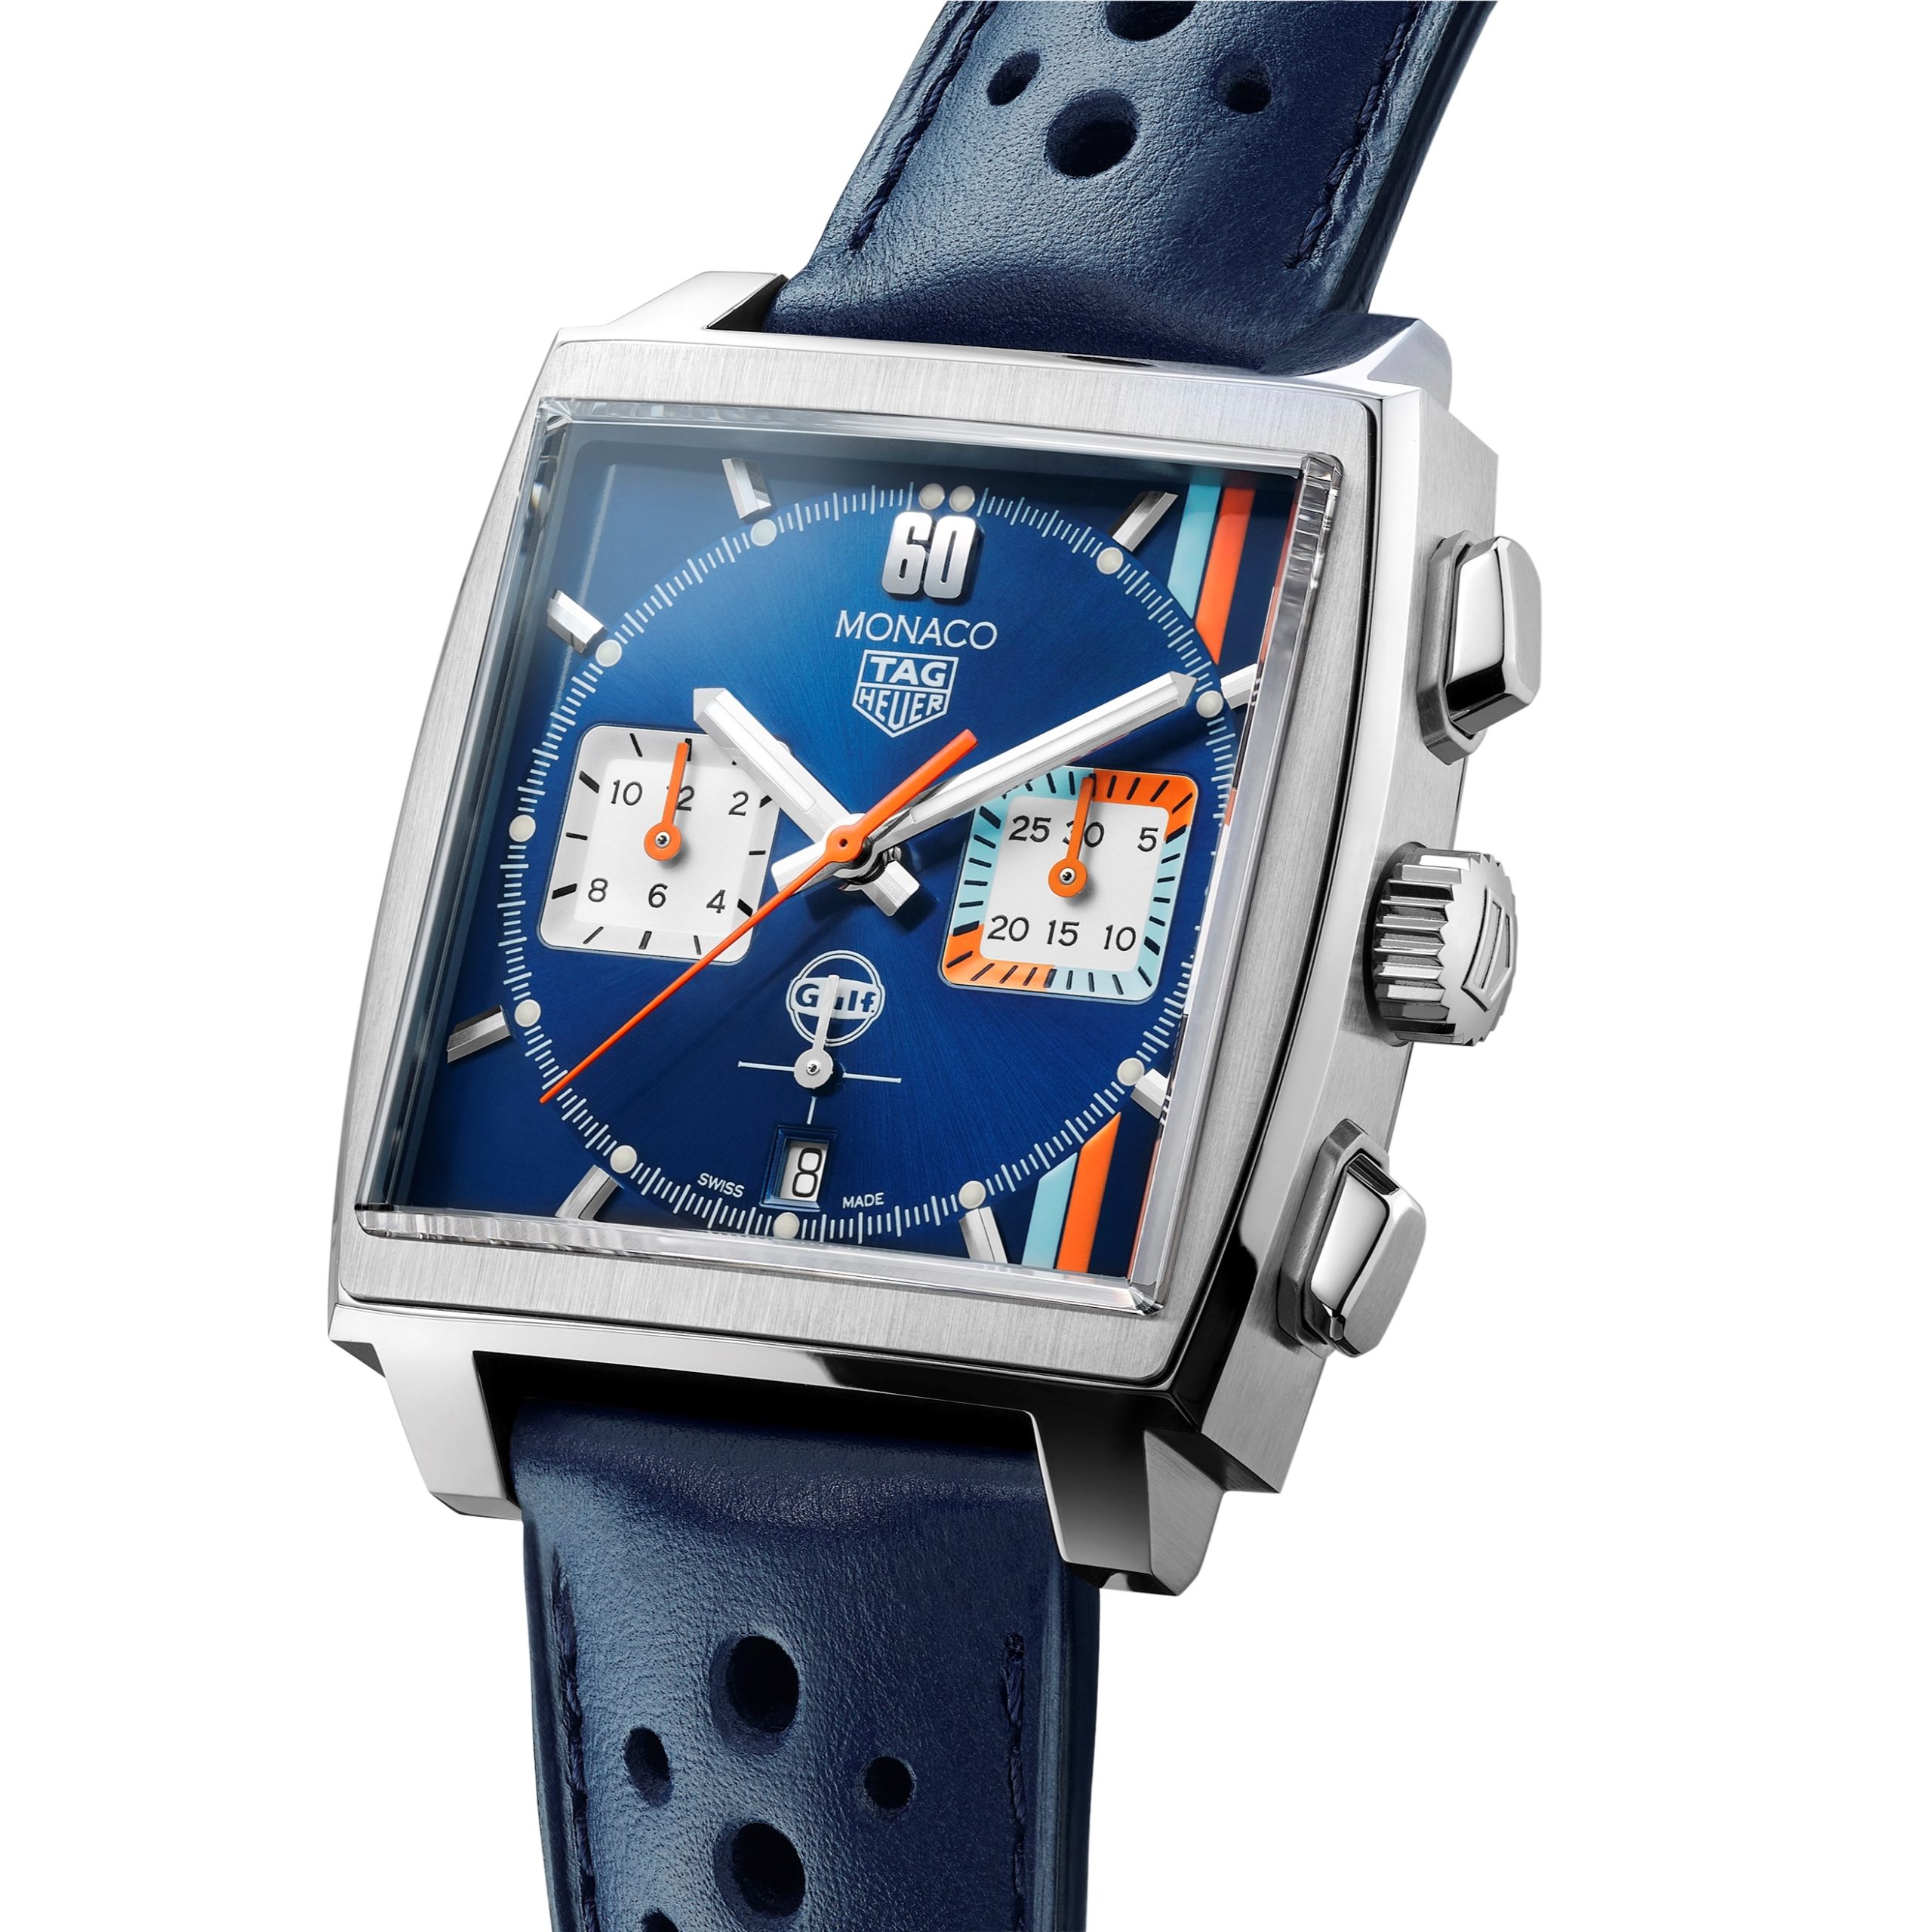 Introducing at Watches & Wonders 2022: TAG Heuer Monaco Gulf Special Edition